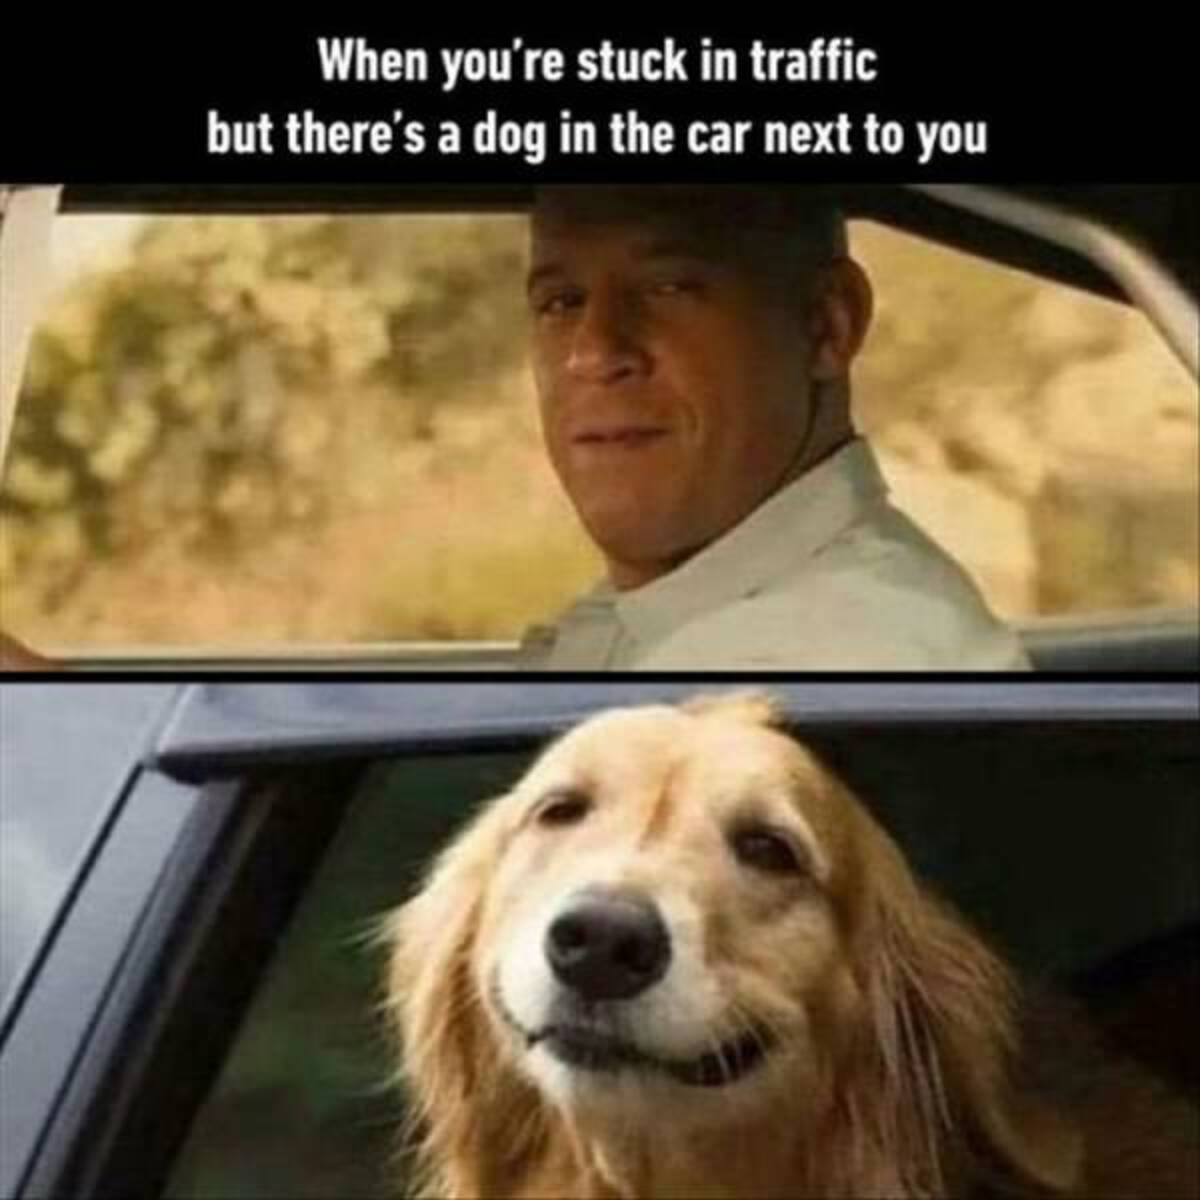 photo caption - When you're stuck in traffic but there's a dog in the car next to you